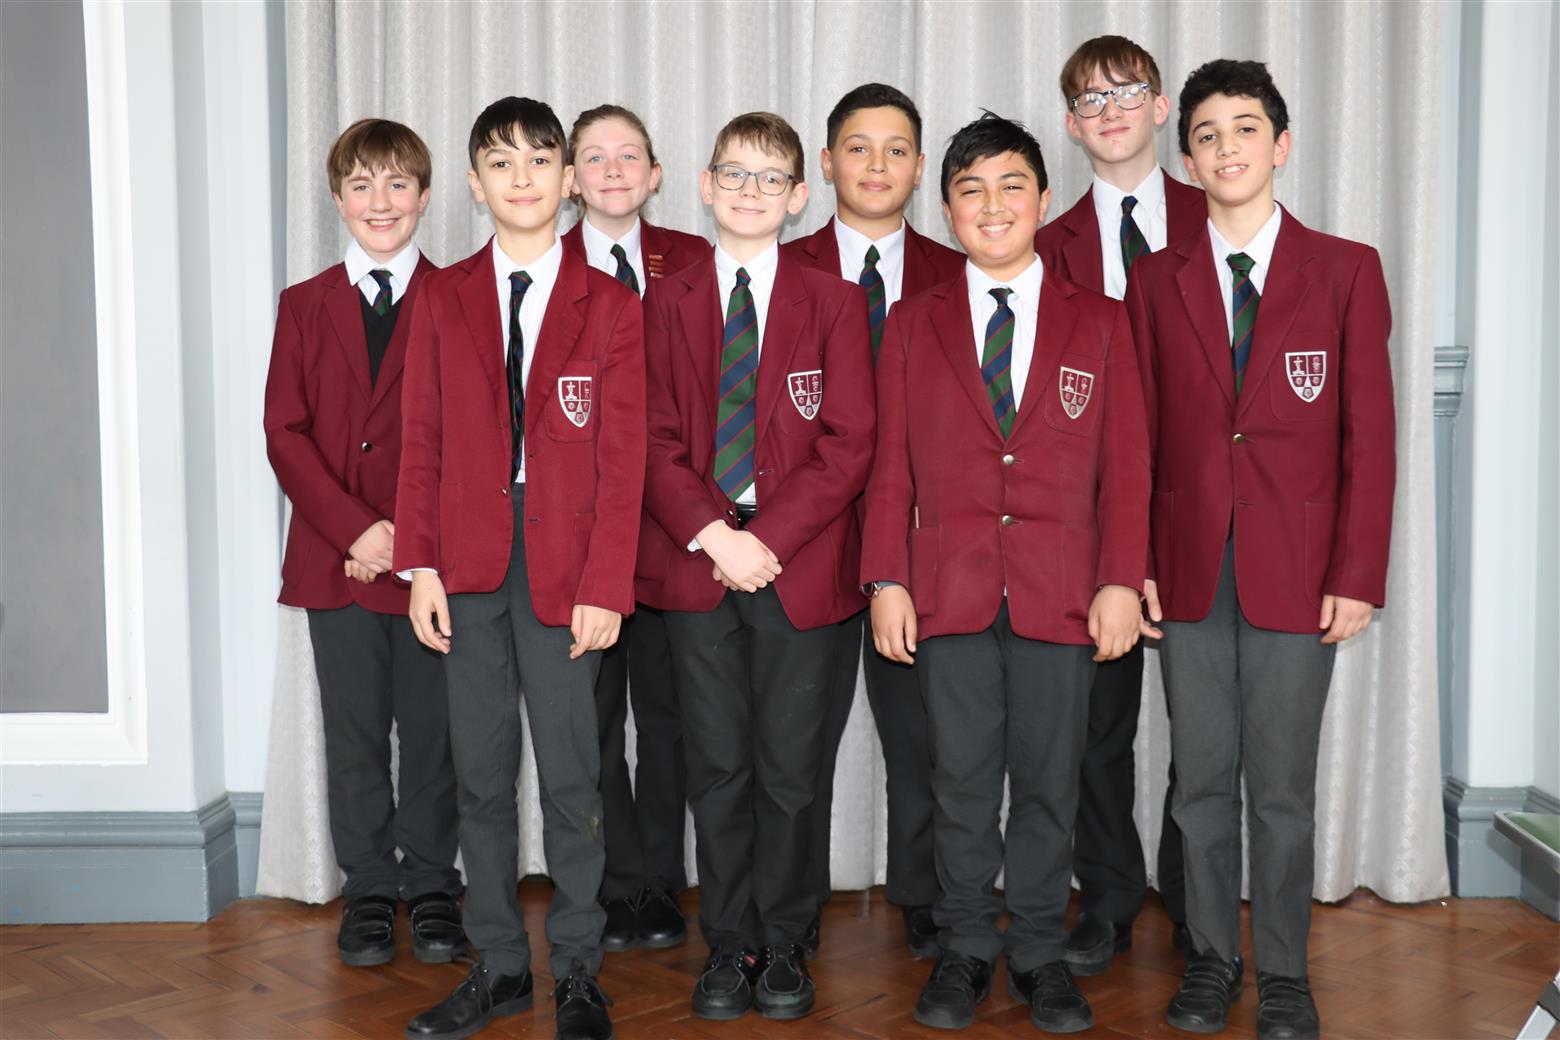 AKS hosts inter-school chess competition v St George's